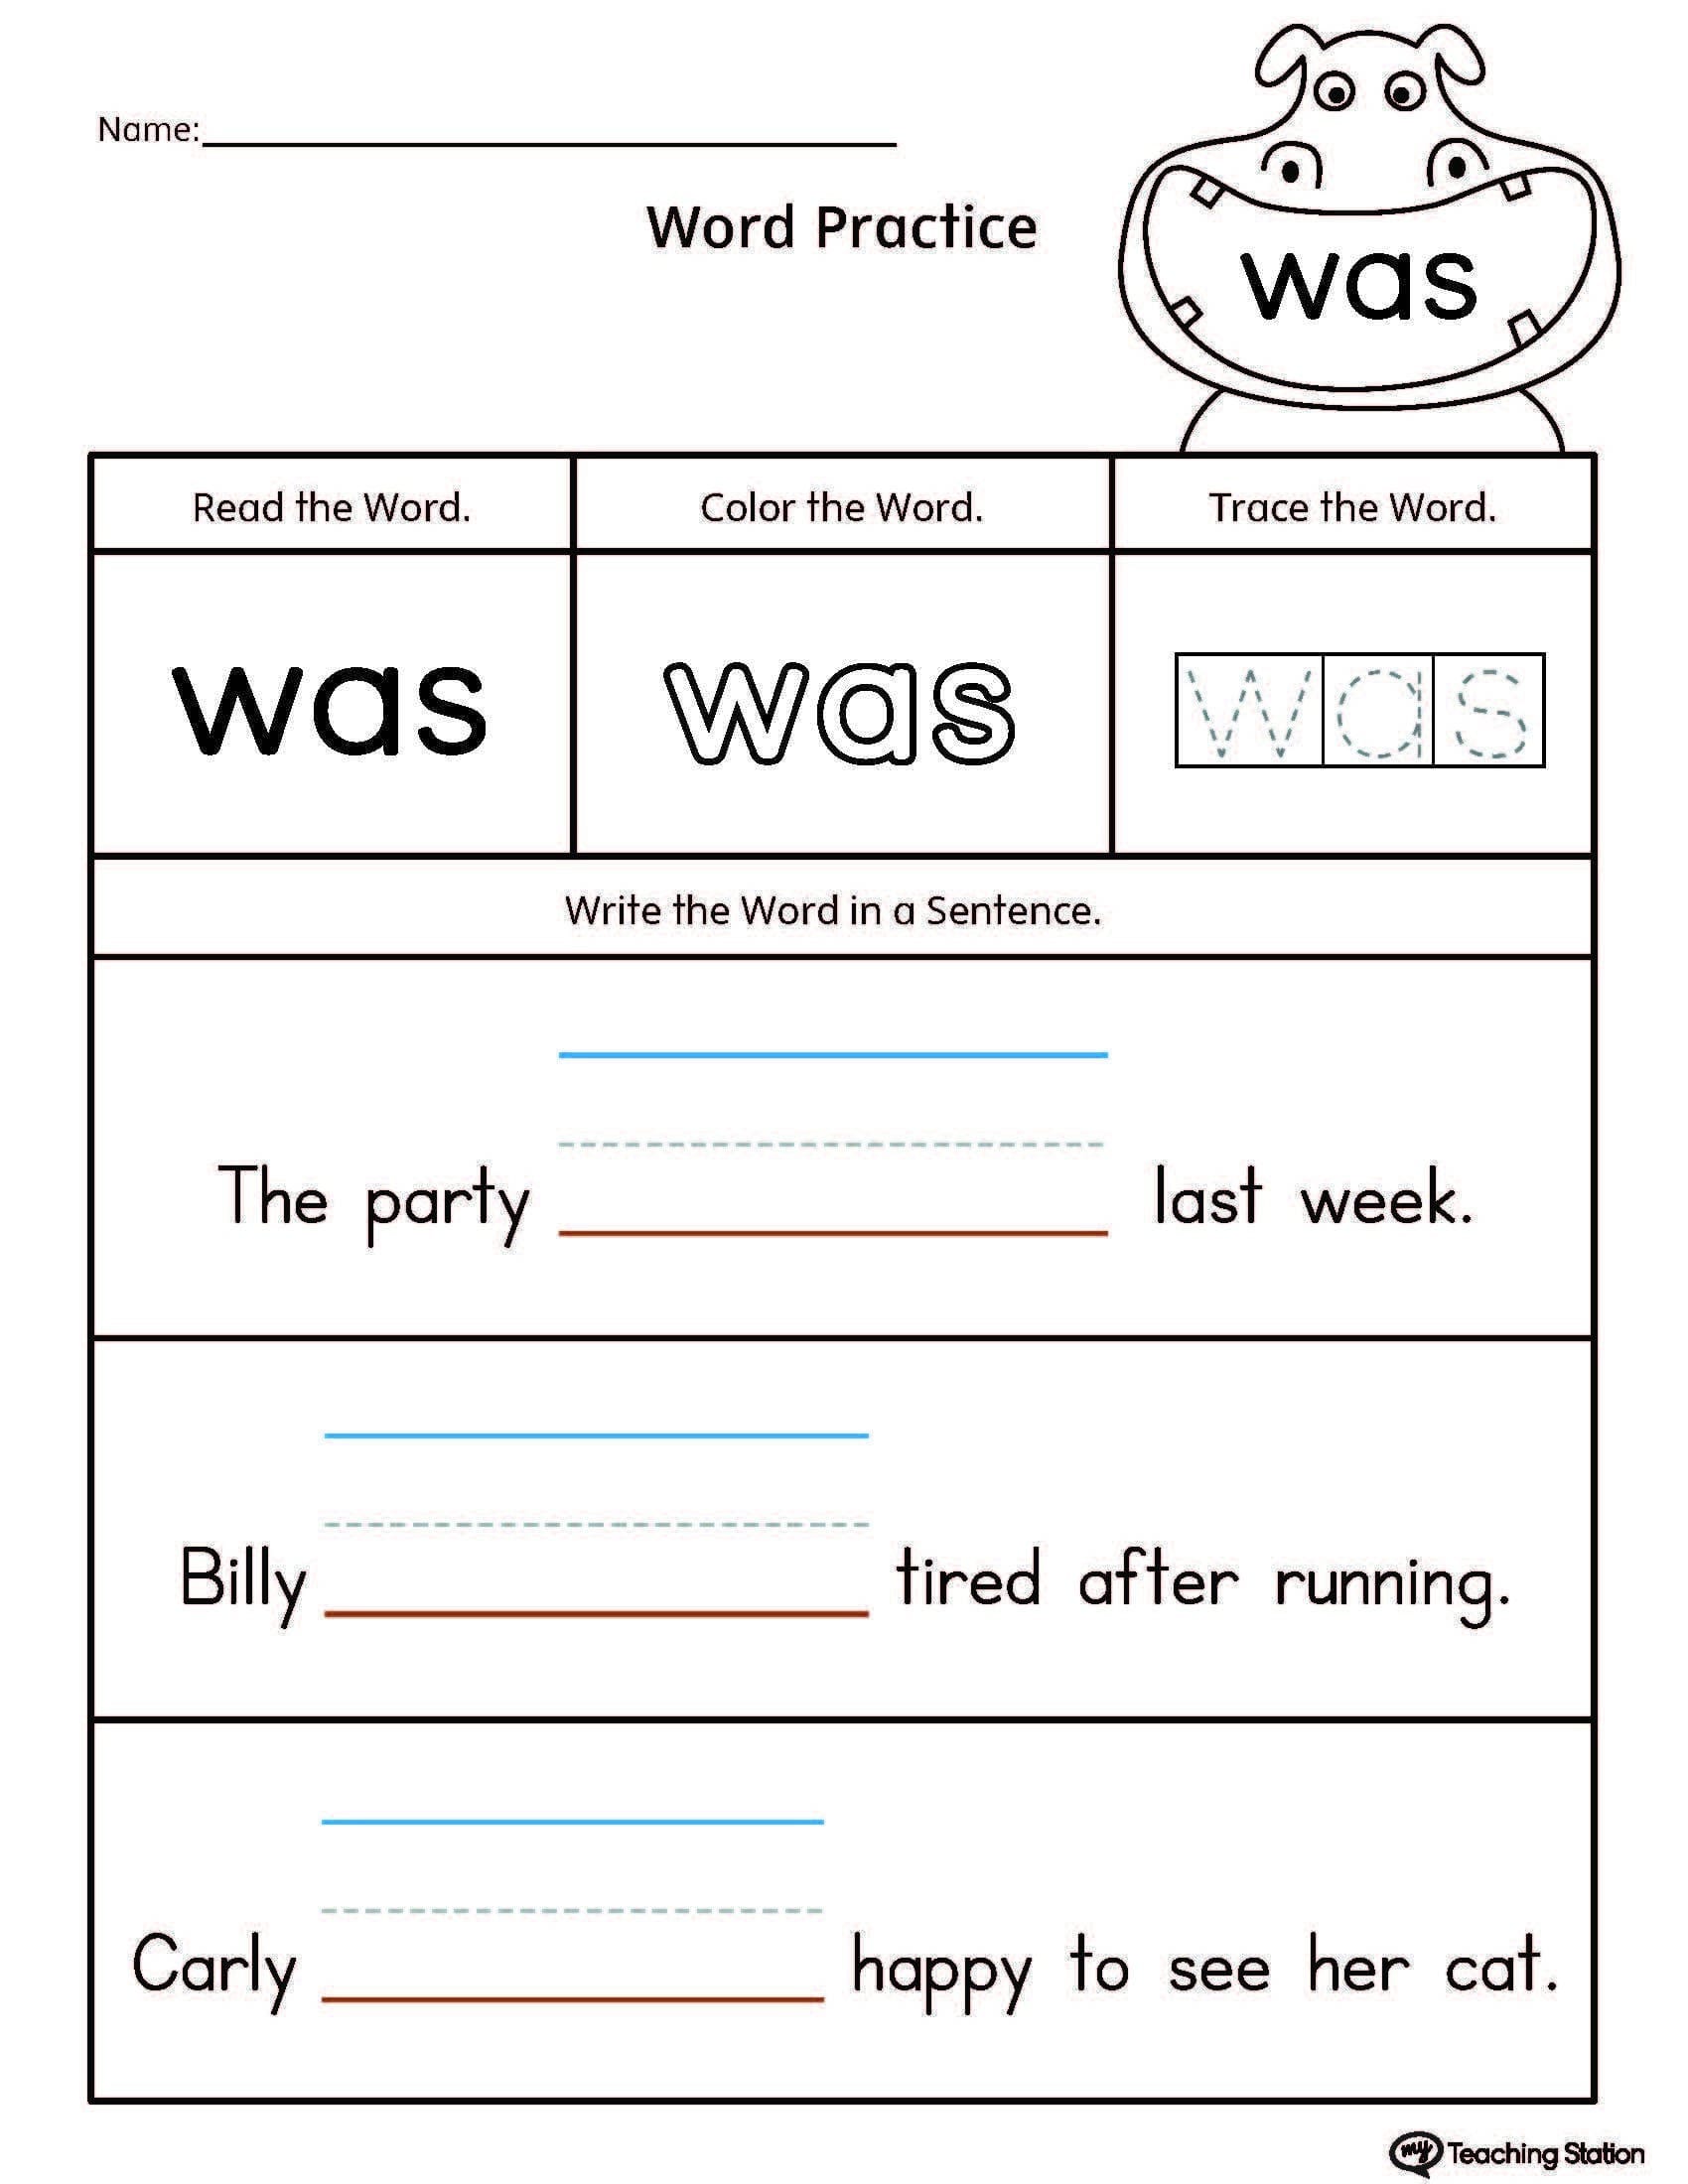 handwriting-without-tears-worksheets-free-printable-70-db-excel